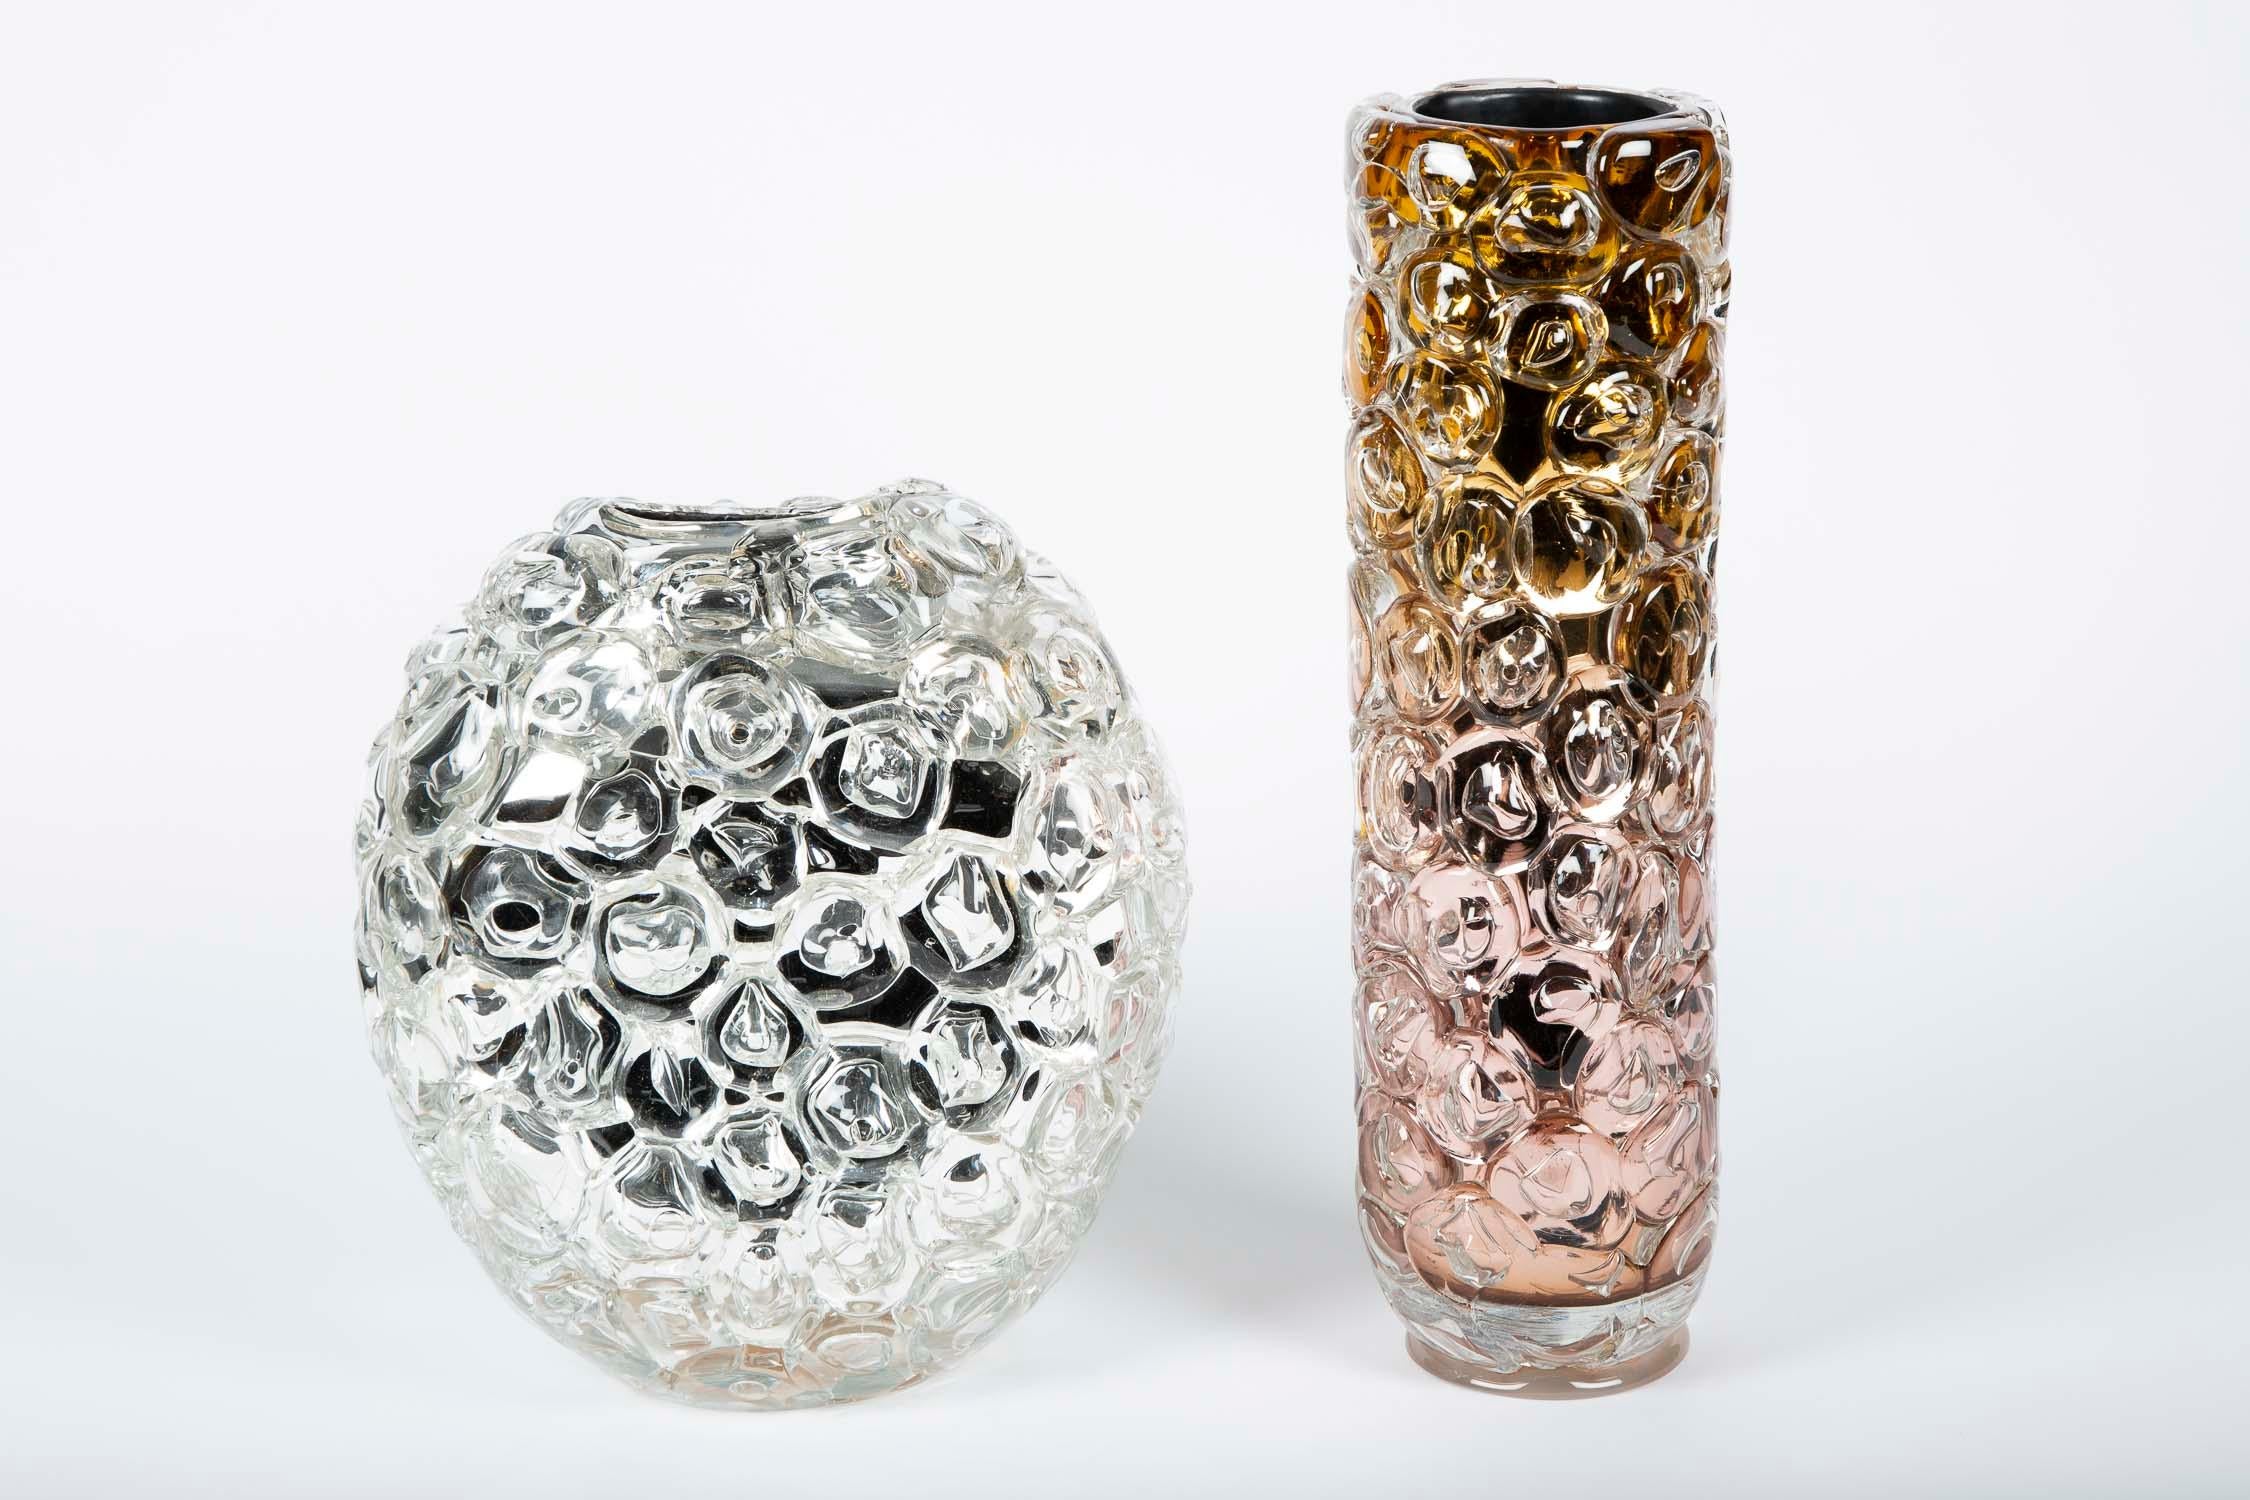 Contemporary Bubblewrap in Gold, a Unique pink, gold & silver glass Vase by Allister Malcolm